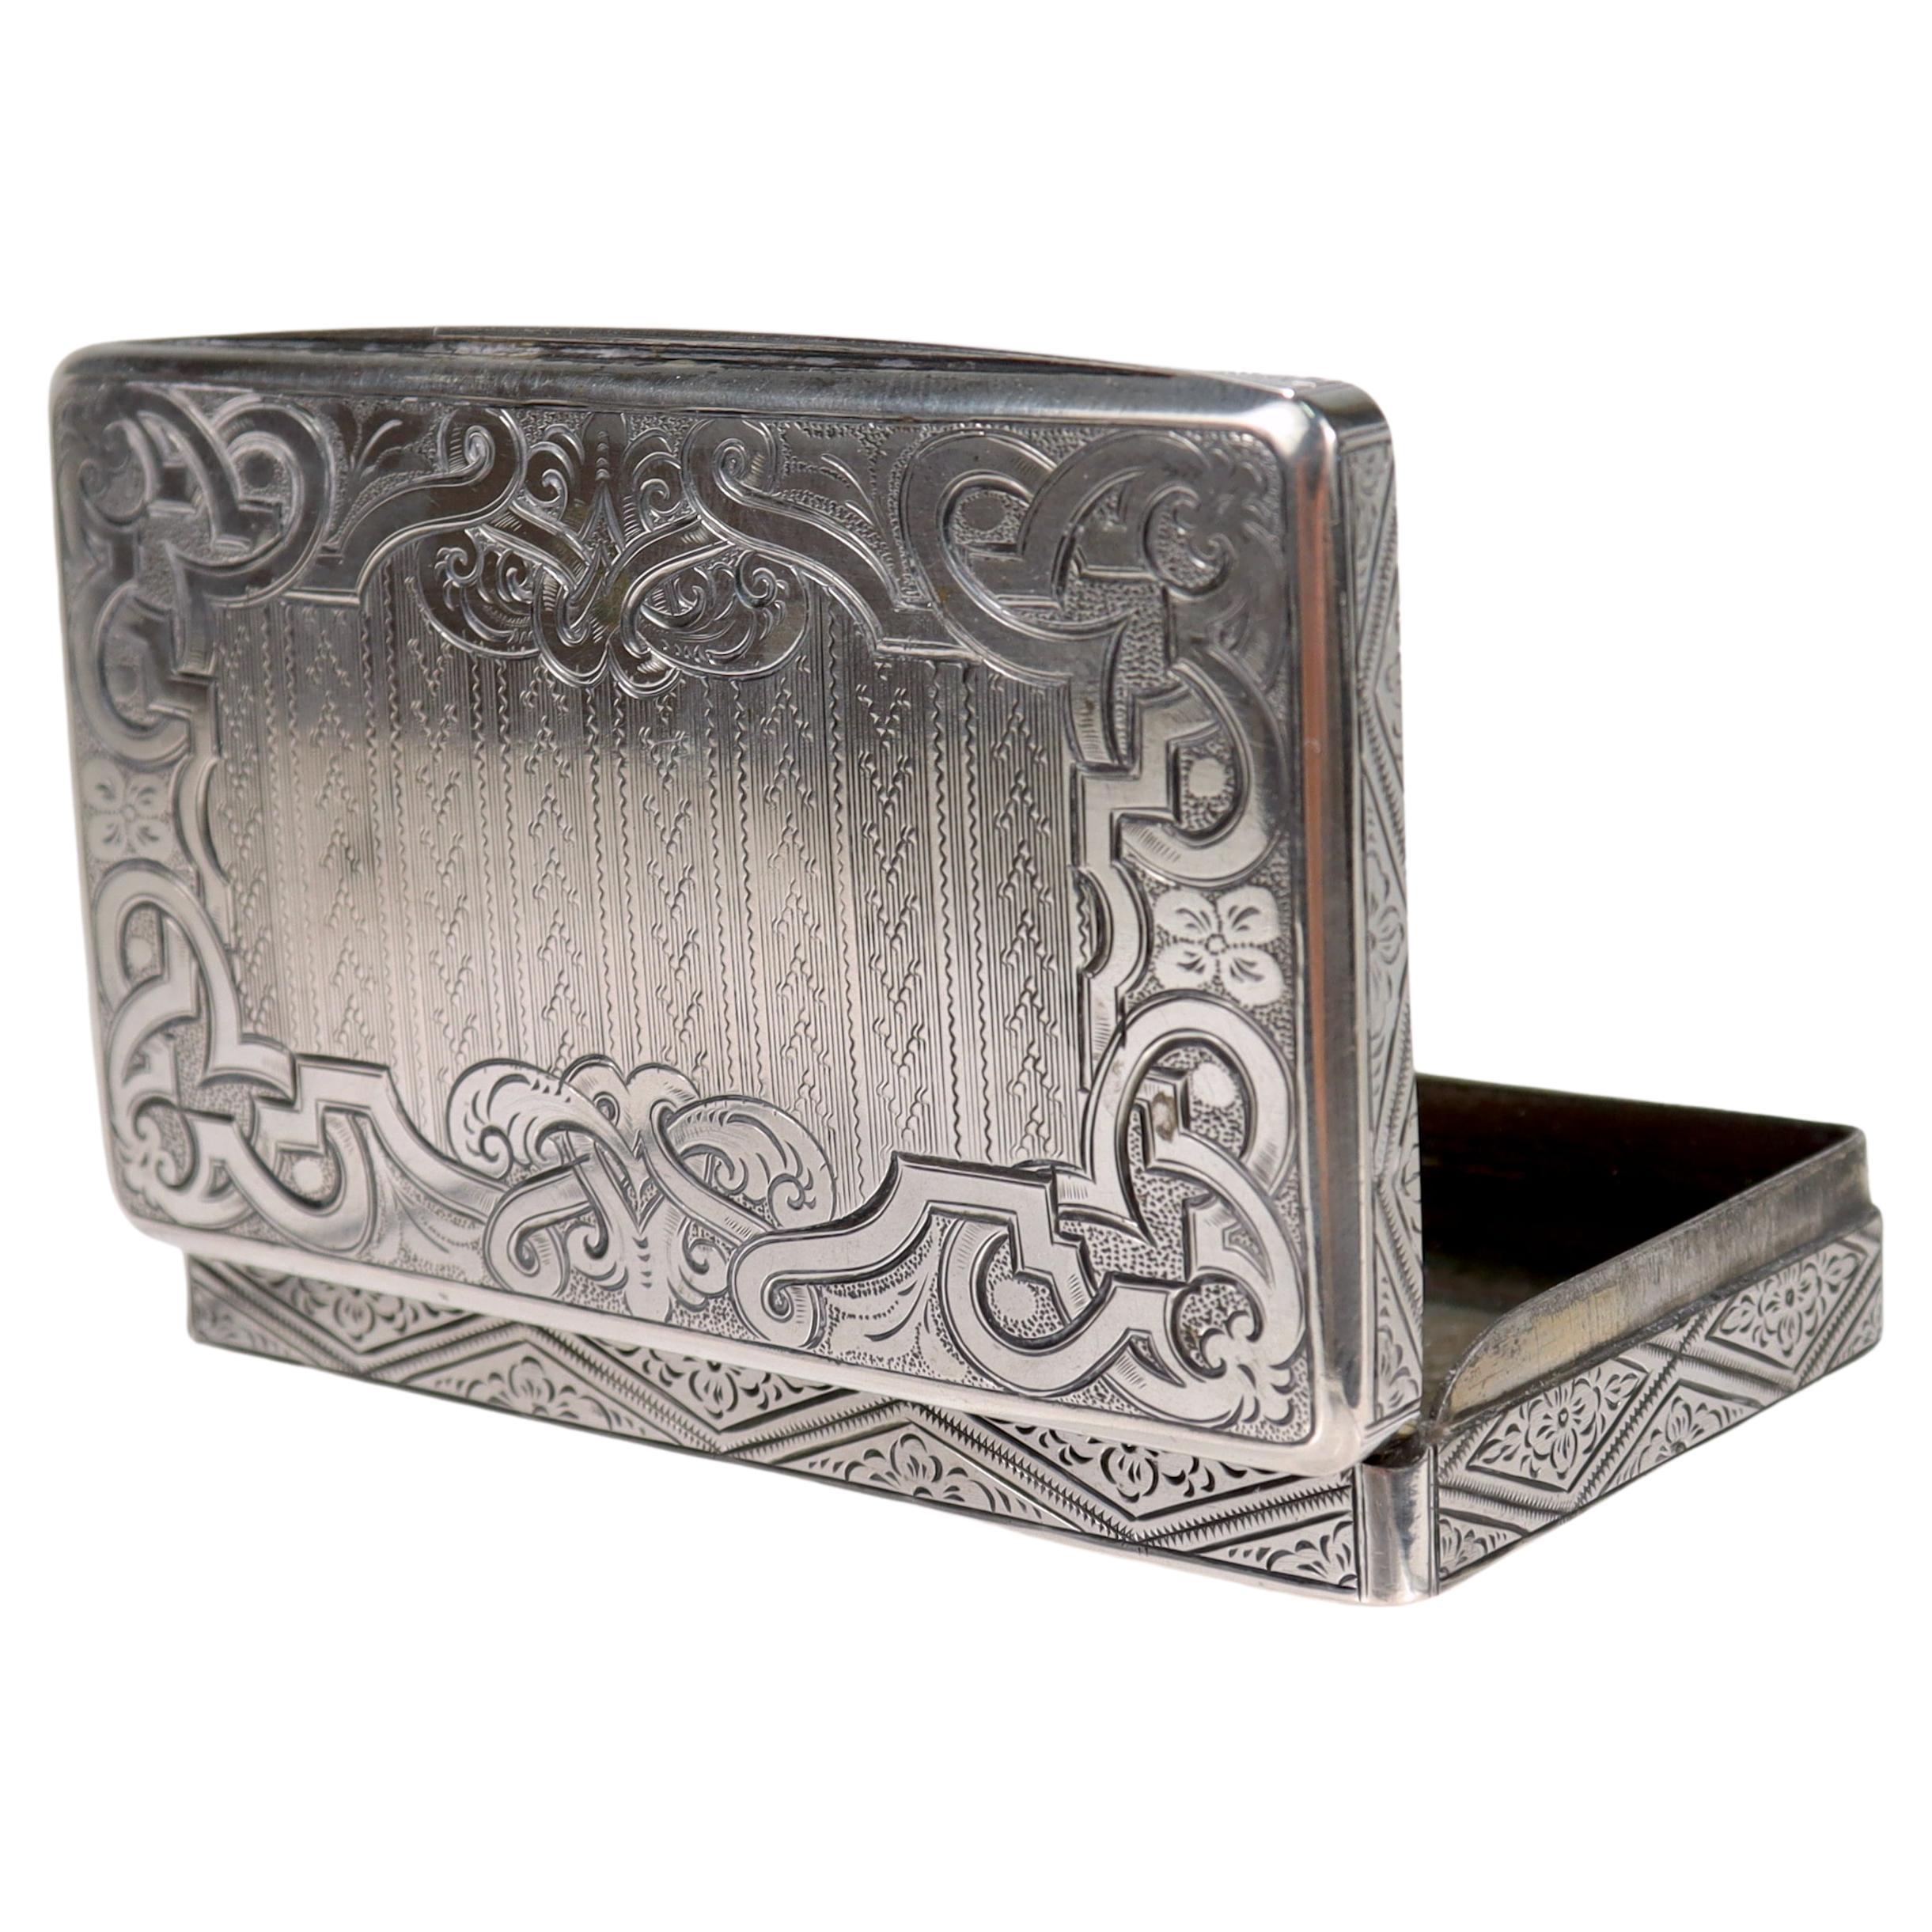 A fine antique silver card case or snuff box.

With engine turned engraved decoration throughout.

Marked with an Austrian silver assay mark for 13 Loth, Vienna, and 1856, along with a maker's mark 'HV'. 

Simply a lovely silver snuff or card